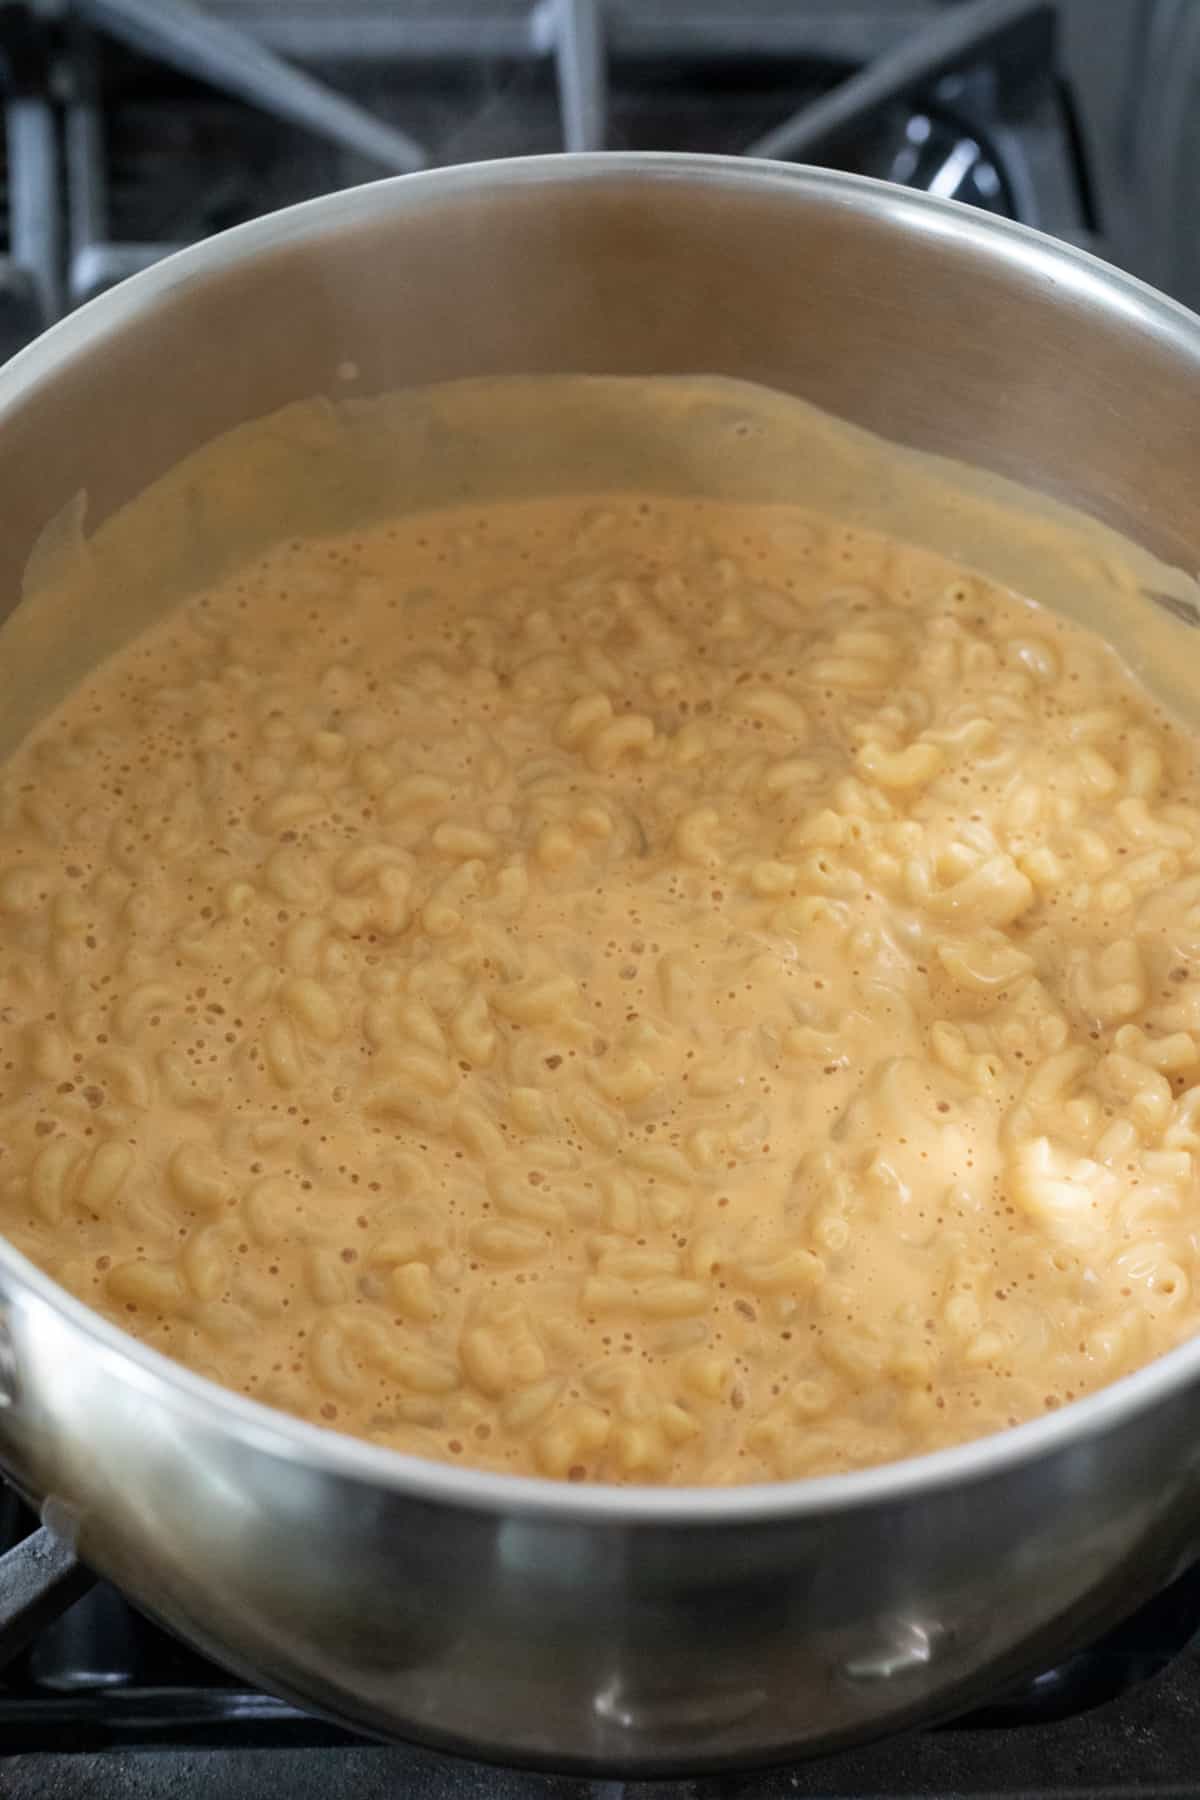 heating sauce with cooked macaroni in pot on stove